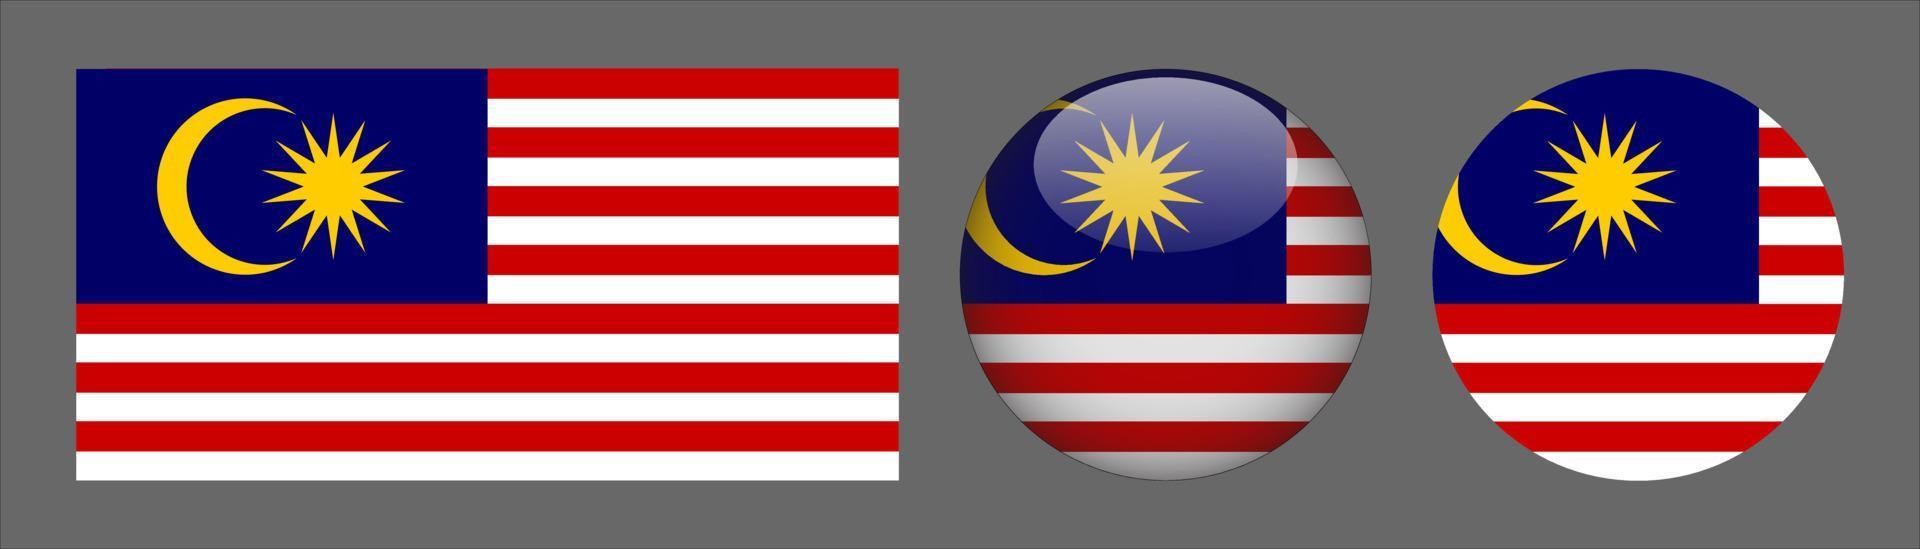 Malaysia Flag Set Collection, Original Size Ratio, 3D Rounded and Flat Rounded. vector